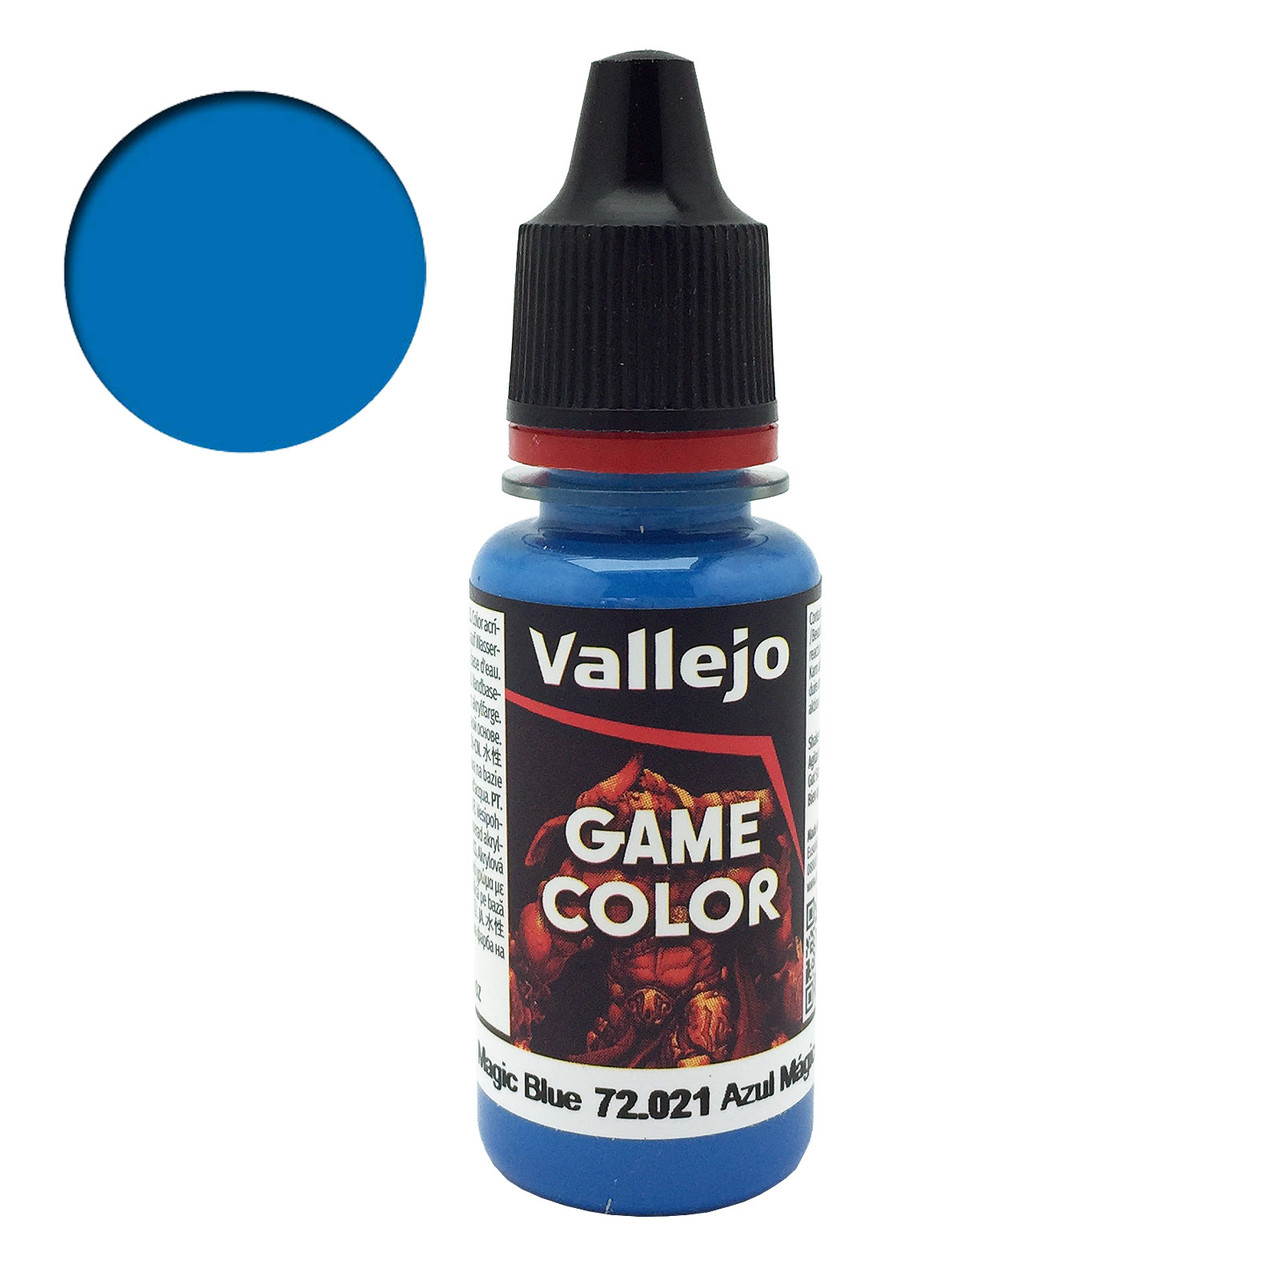 Magic Blue Vallejo Game Color Acrylic Paint 72021 / 039